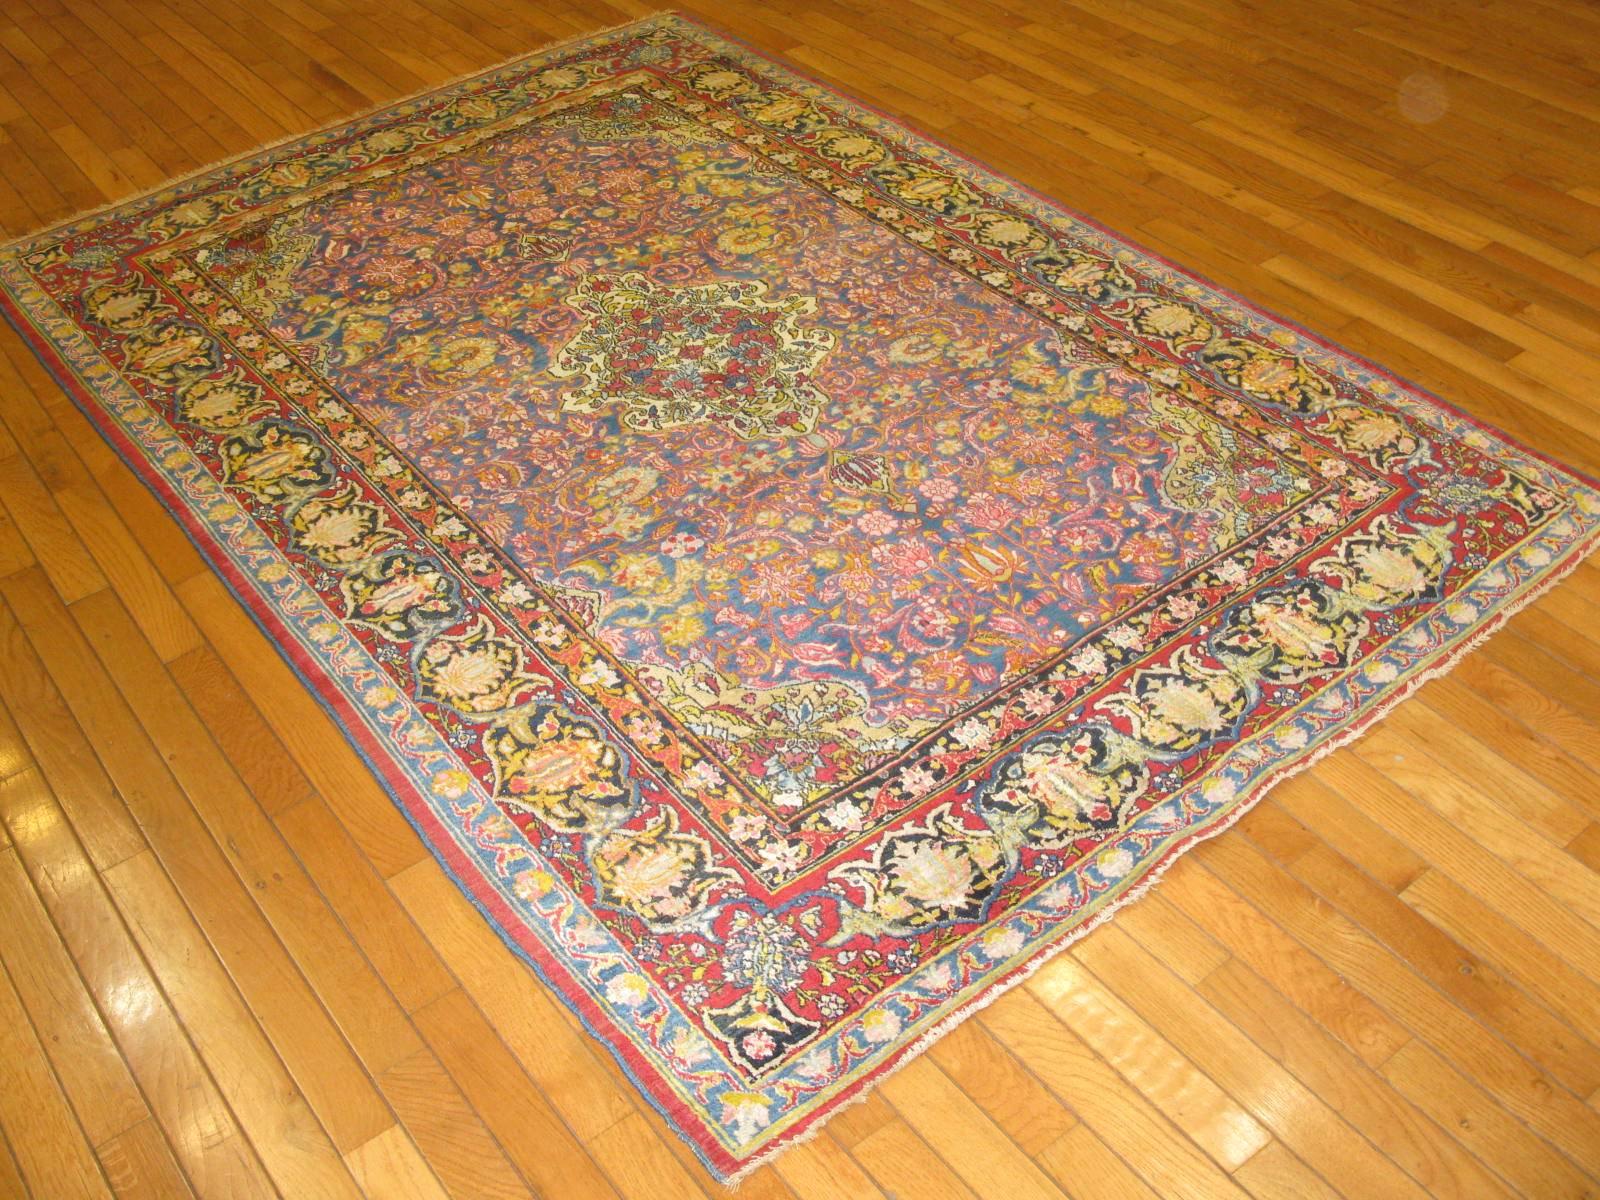 Antique Hand Knotted Wool Blue Color Persian Isfahan Rug In Excellent Condition For Sale In Atlanta, GA